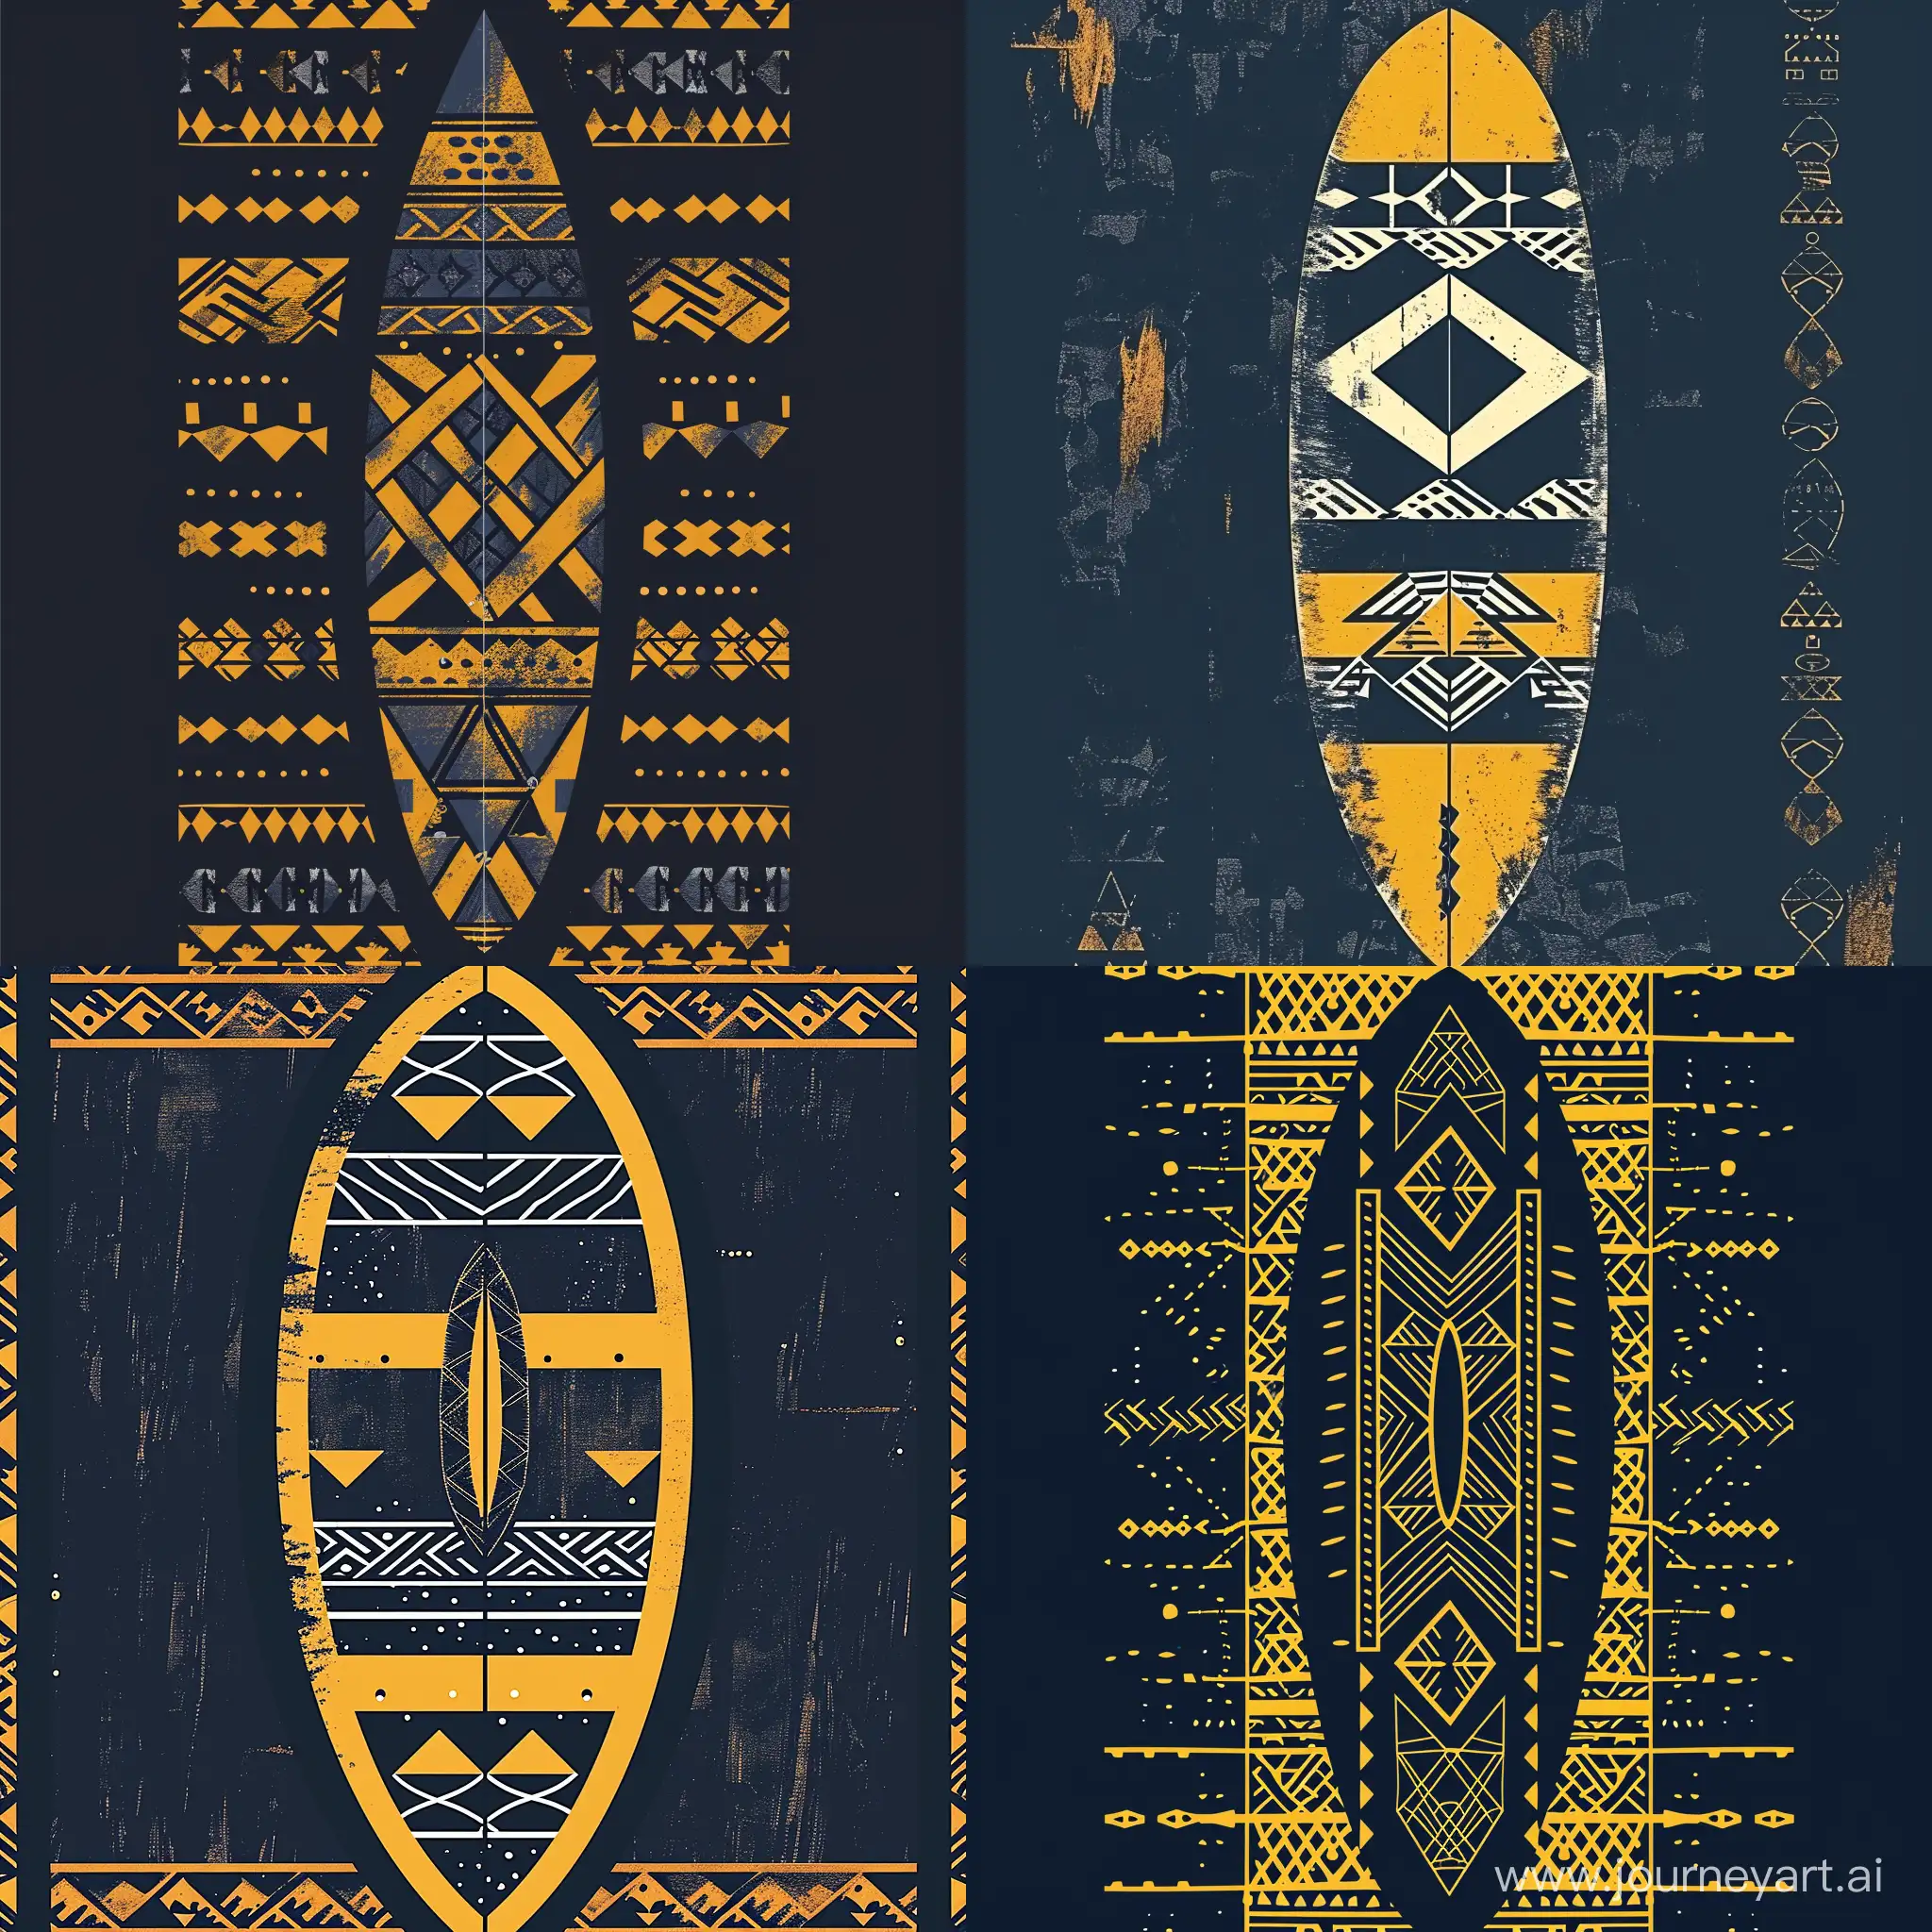 rough shape of an abstract design of a surfboard with geometric elements on it, in the style of African patterns, illustration, layer stencil work, patterned background, navy and yellow